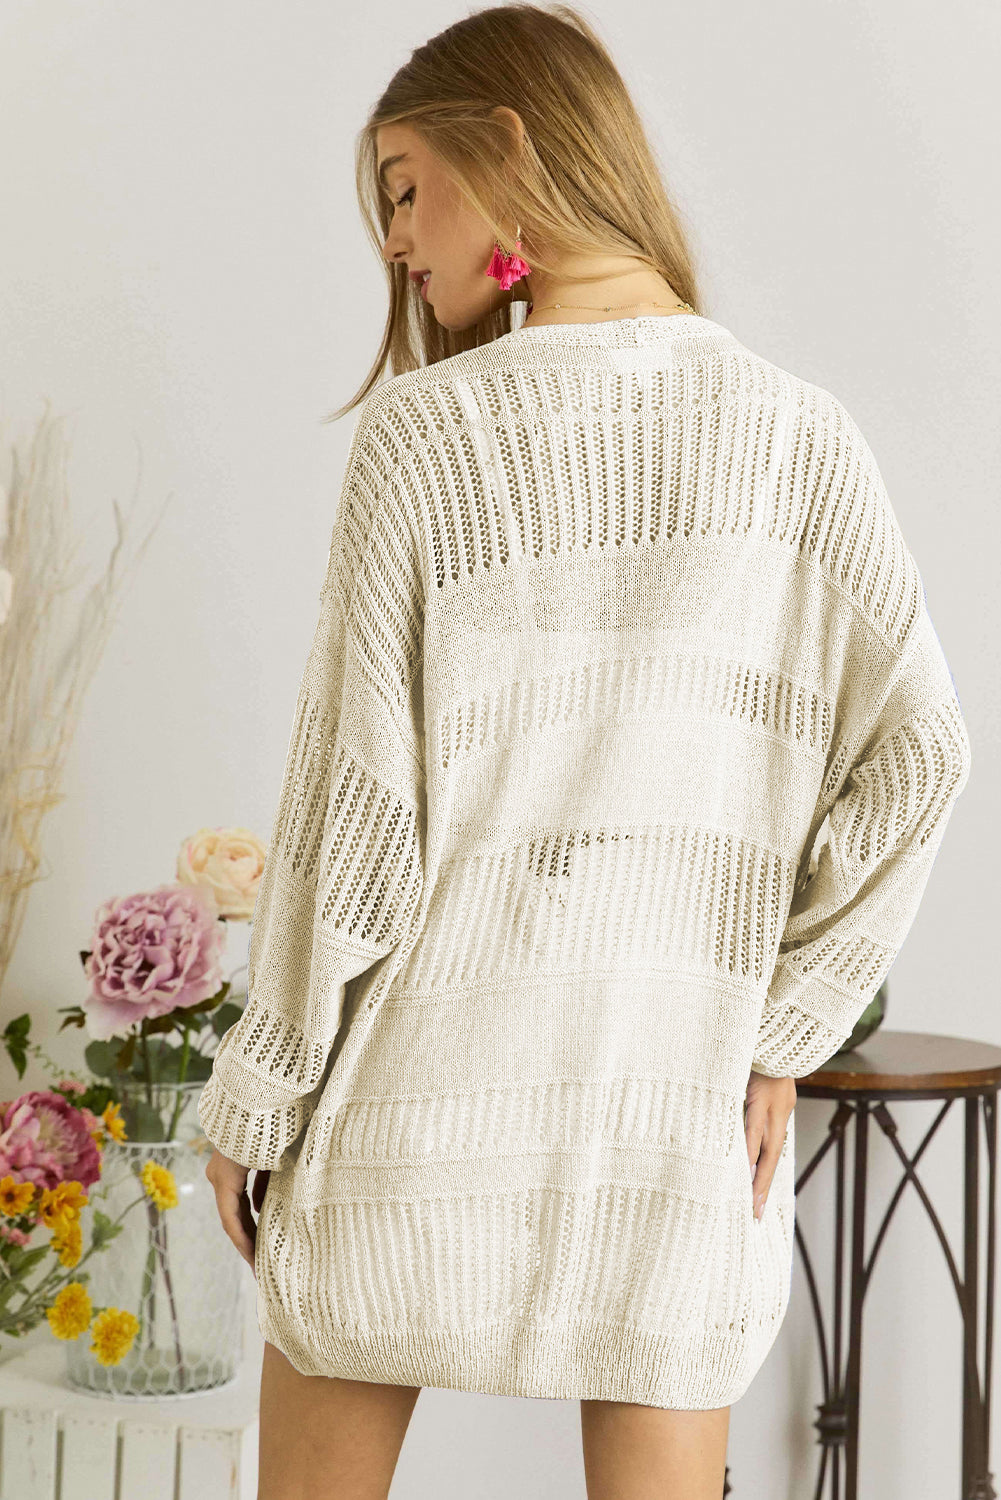 White Solid Color Open Front Knit Tunic Cardigan